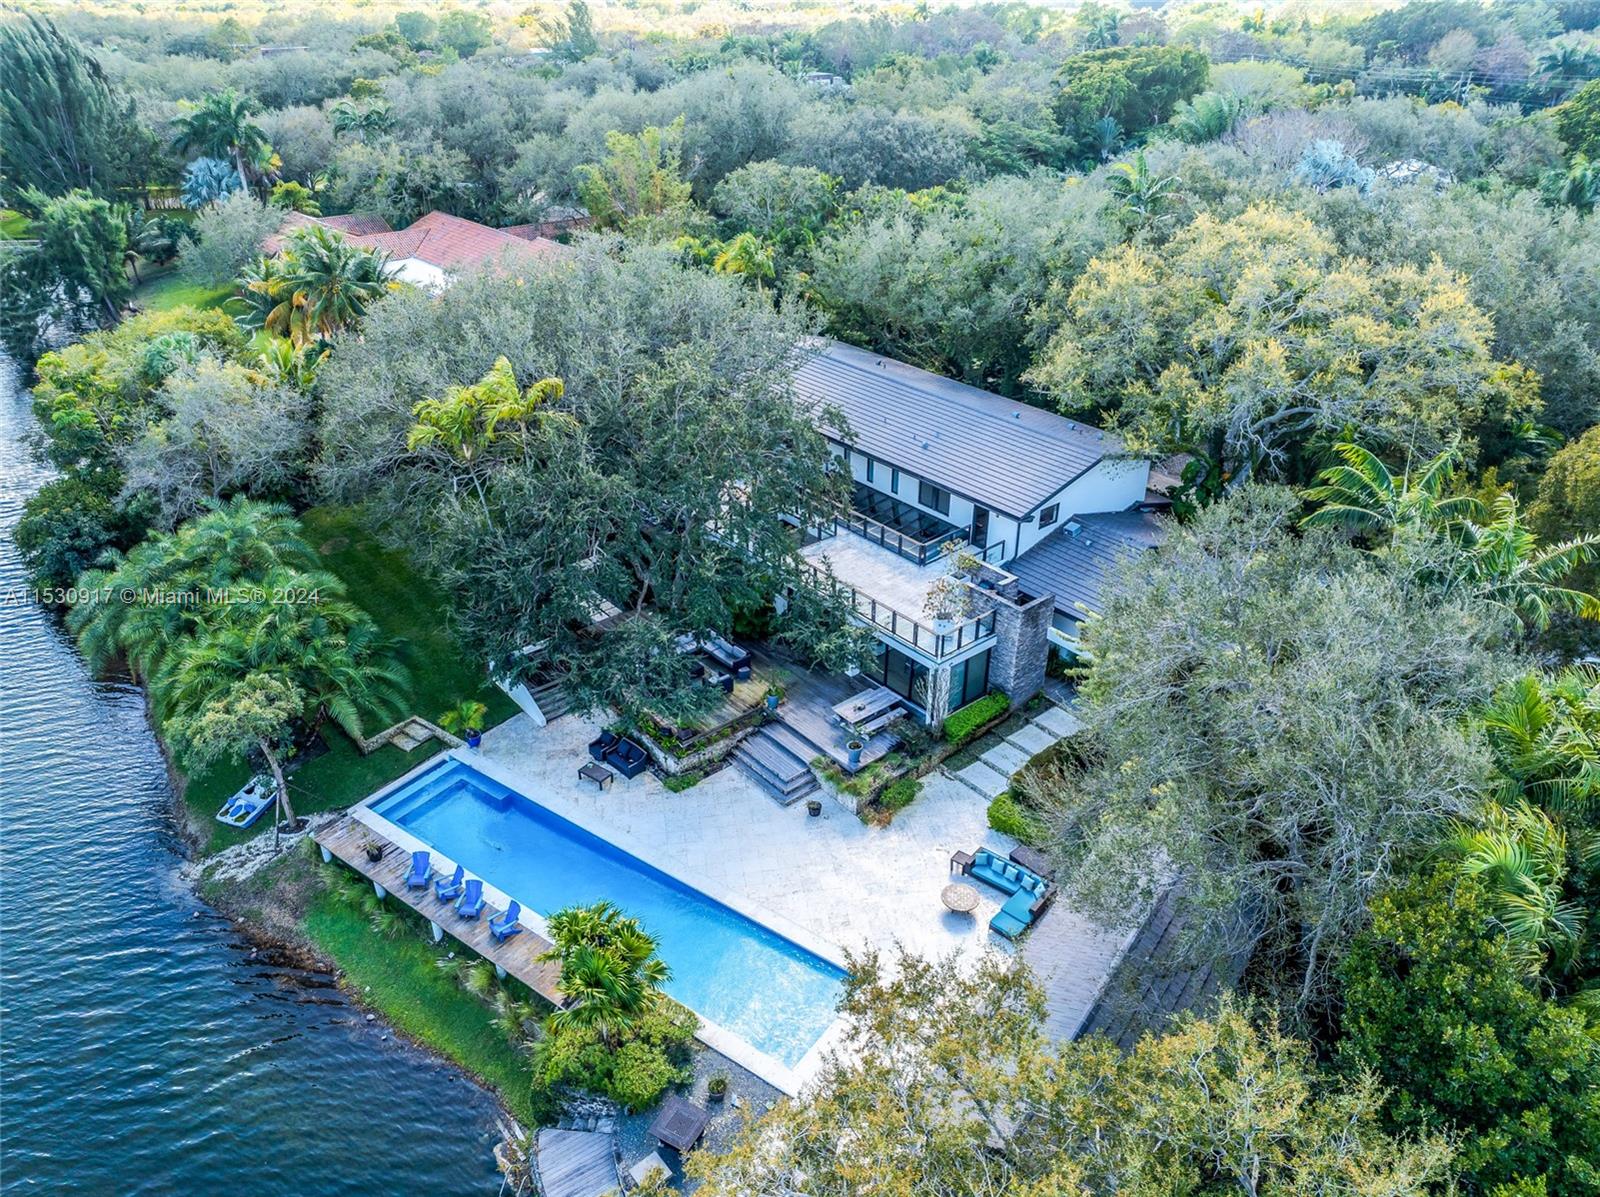 Nestled within the prestigious gated community of Snapper Creek in Coral Gables, this magnificent Home estate exemplifies the epitome of luxury living. Boasting timeless elegance and an array of upscale features and high end finishes, this residence offers a rare opportunity for those seeking the pinnacle of South Florida with 24/7 security ensures tranquility and privacy overlooking the lake. A chef's dream the kitchen dazzles with top-tier appliances, custom cabinetry, and a central island.The master bedroom retreat indulges with large balcony, spa-like ensuite, and abundant closet space.Multiple living areas with stunning skyline and natural light . Exceptional Entertaining-spaces with sauna and outdoor gourmet area. Access to a private Marina with a full time dock-master.